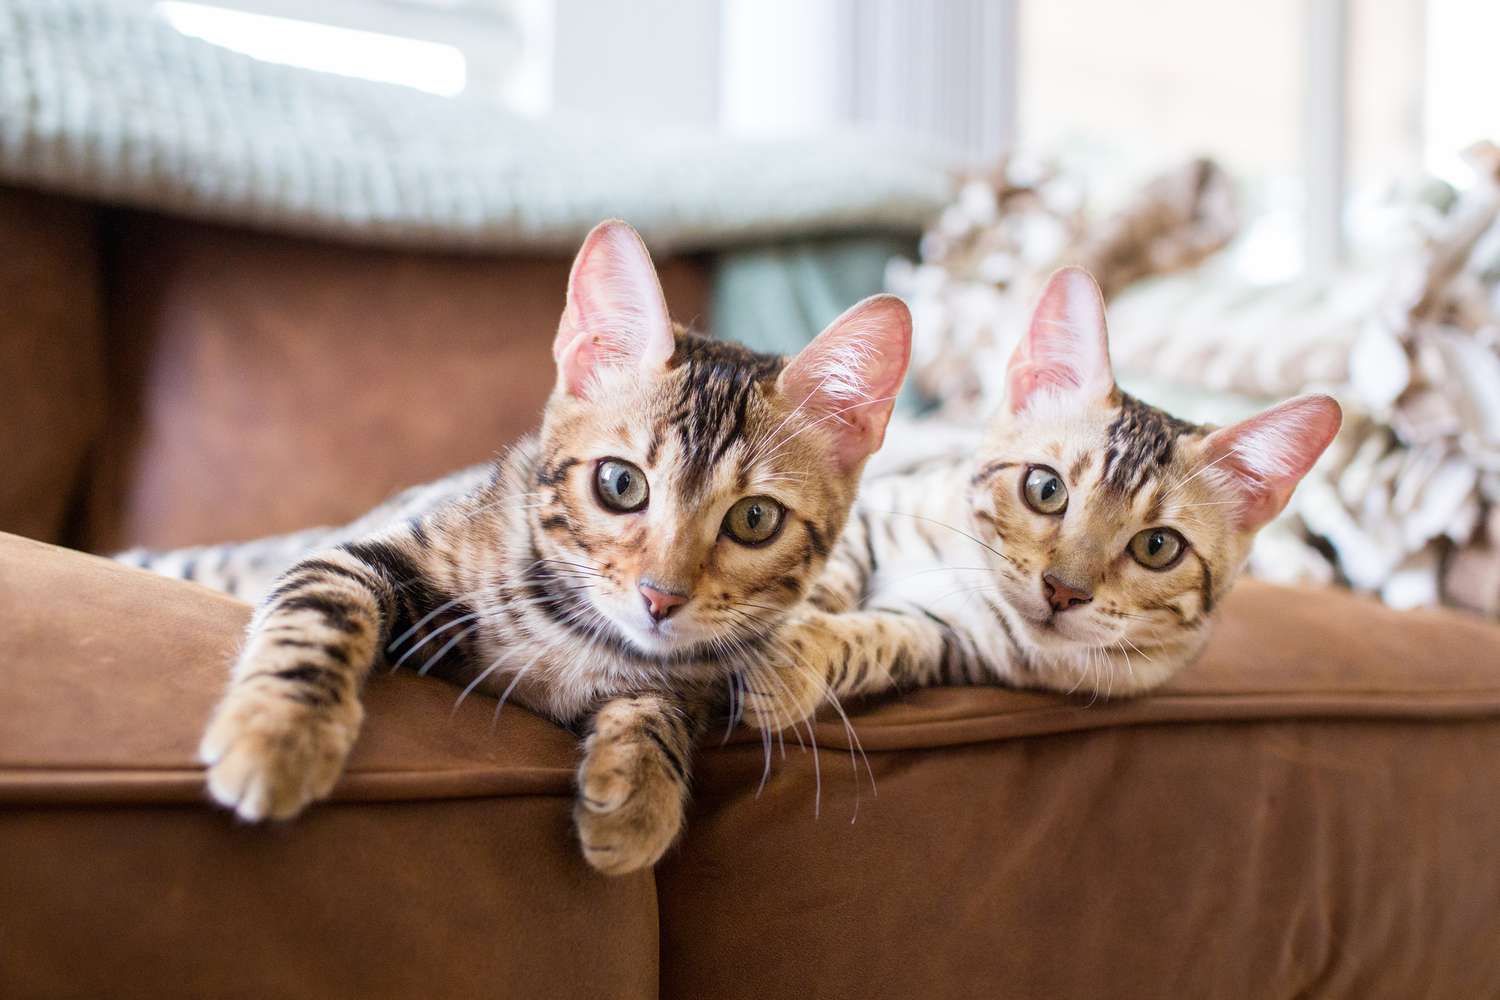 Bengal kittens on leather sofa indoors